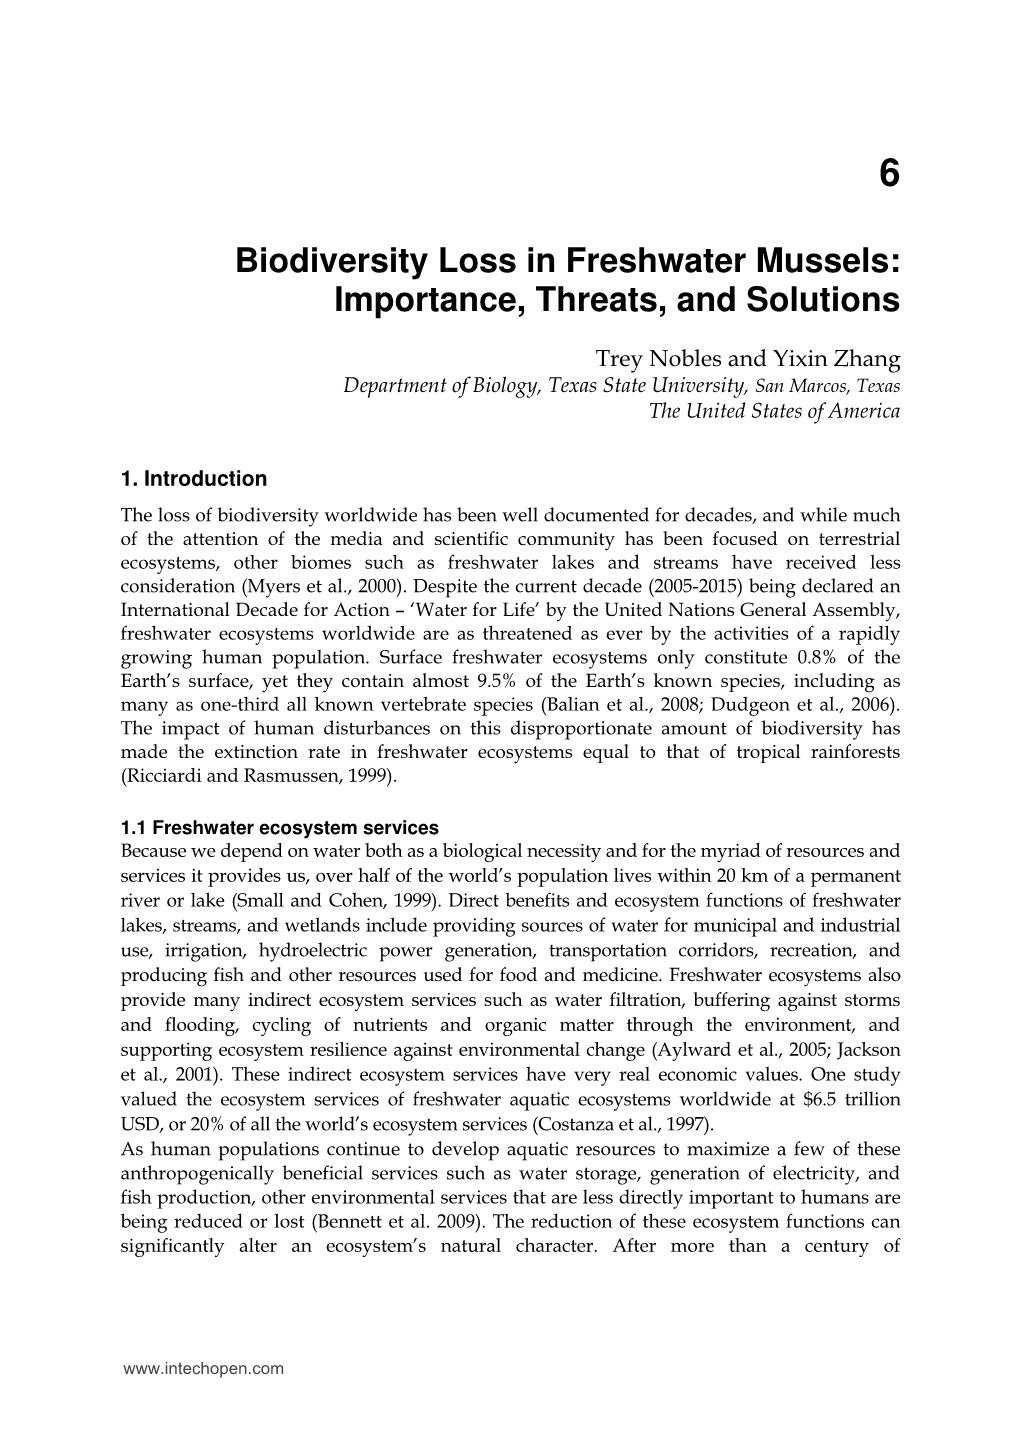 Biodiversity Loss in Freshwater Mussels: Importance, Threats, and Solutions